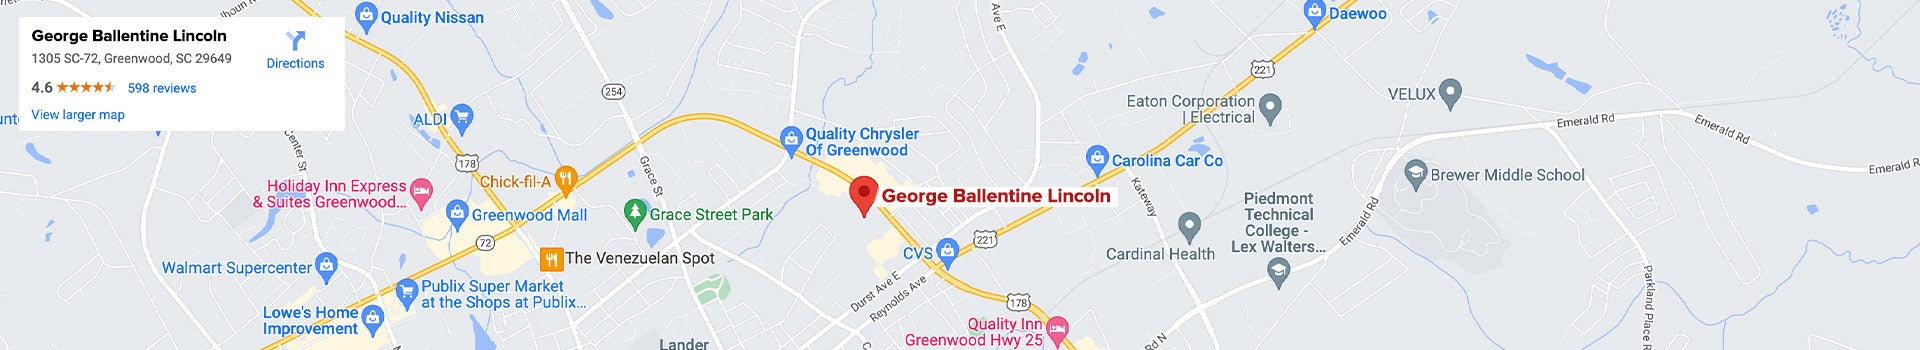 George Ballentine Lincoln Directions